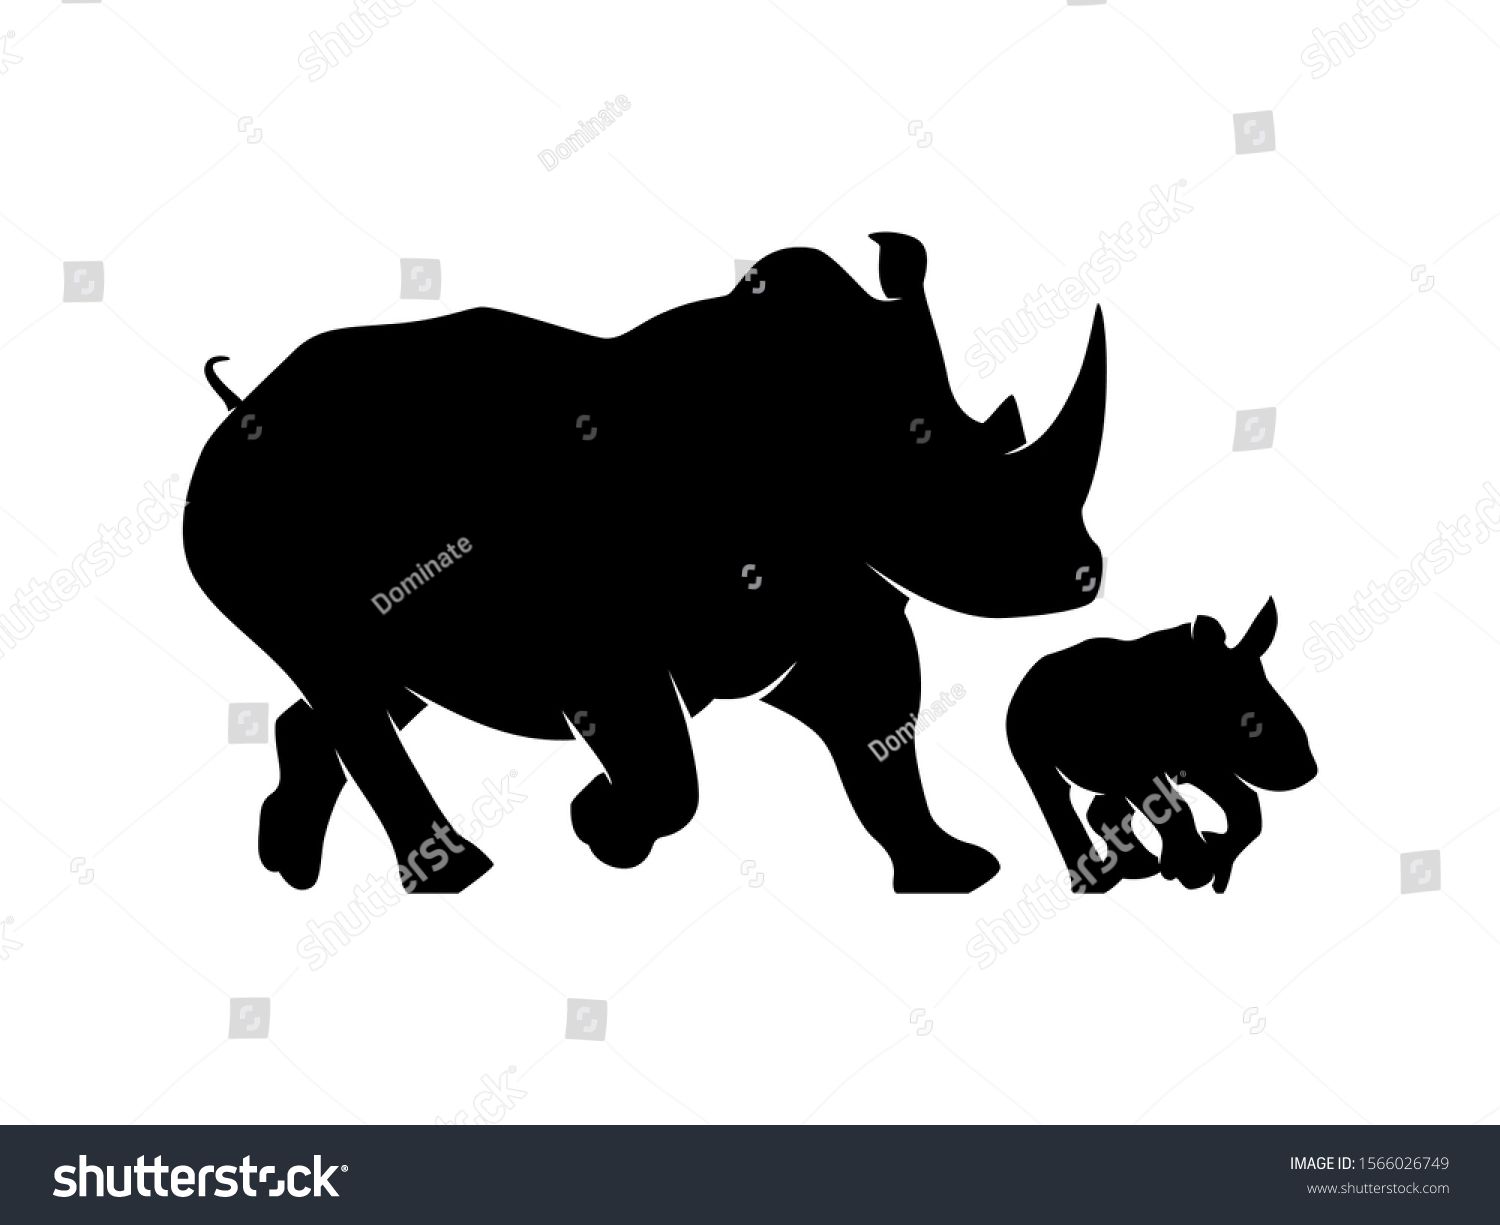 Rhino Animal Silhouette On White Background Isolated Vector